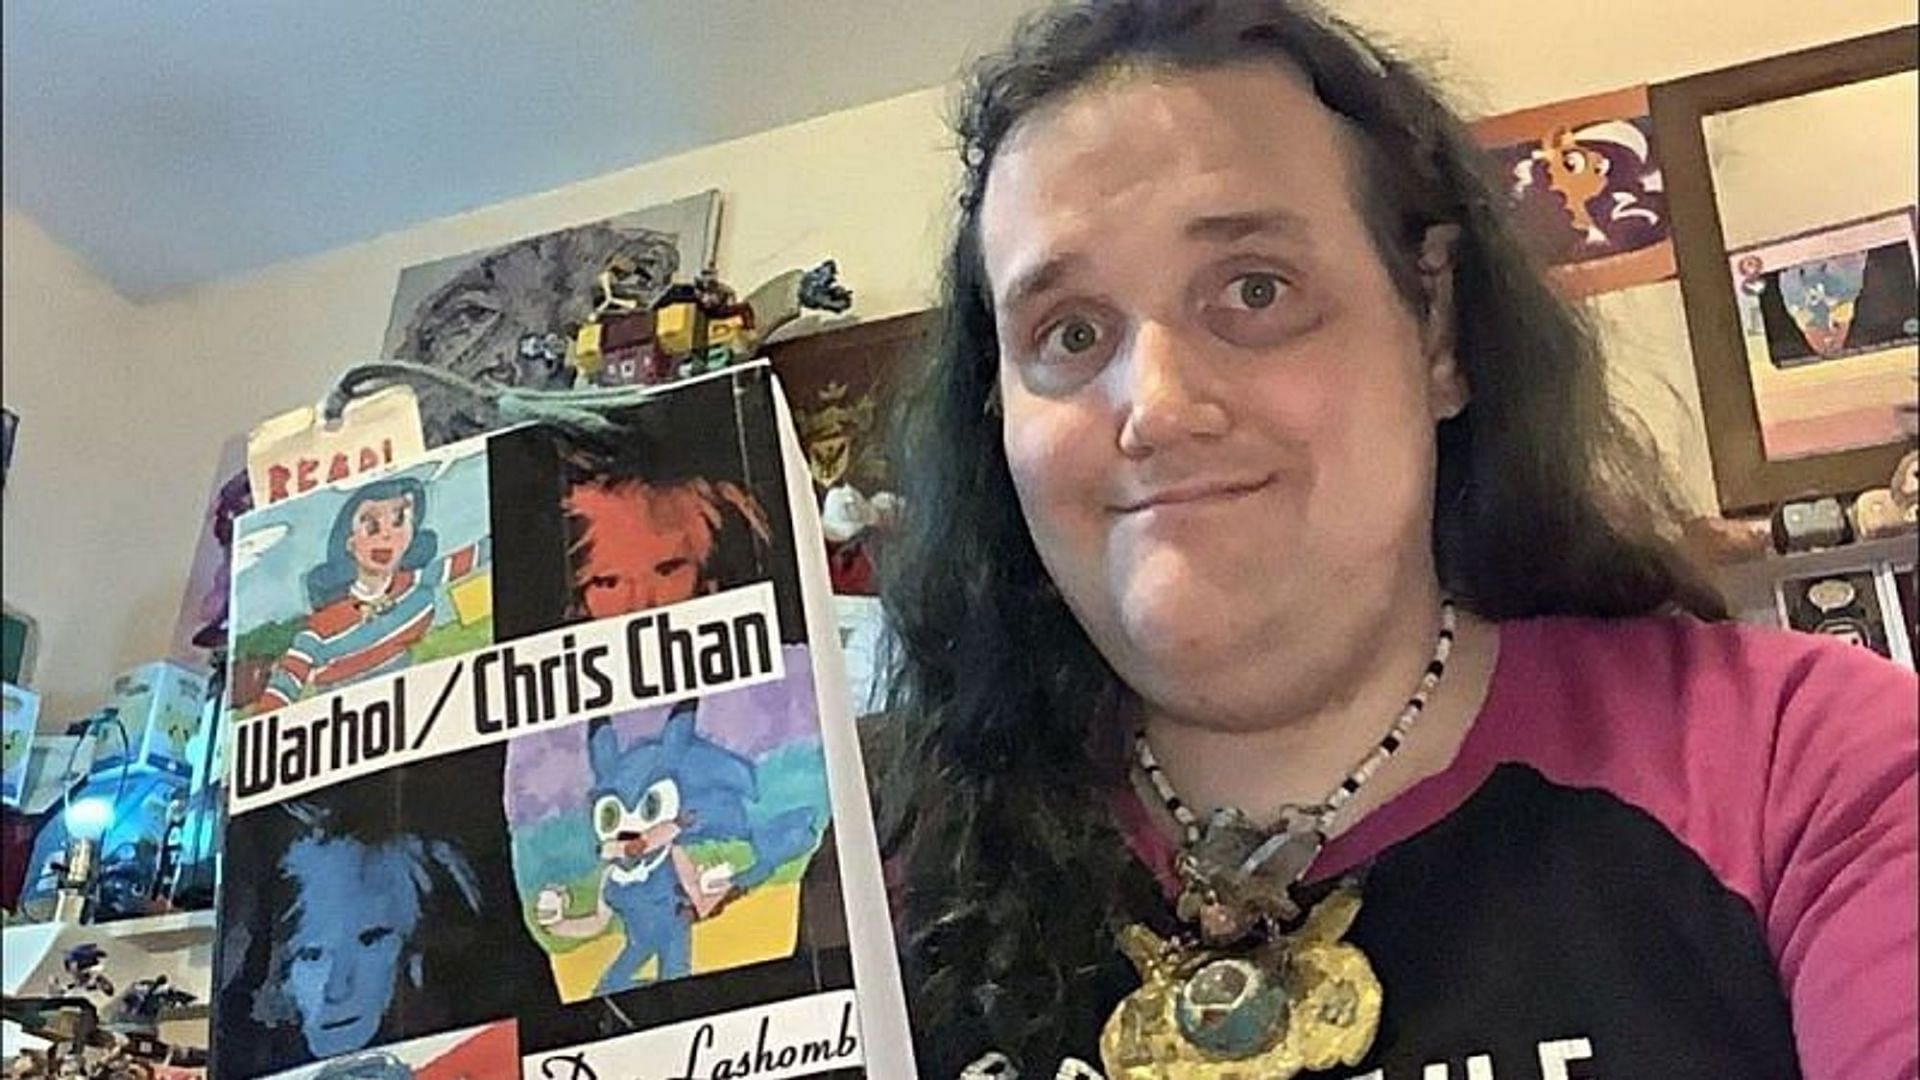 Transgender Youtube Star Chris Chan to appear in court on charges of